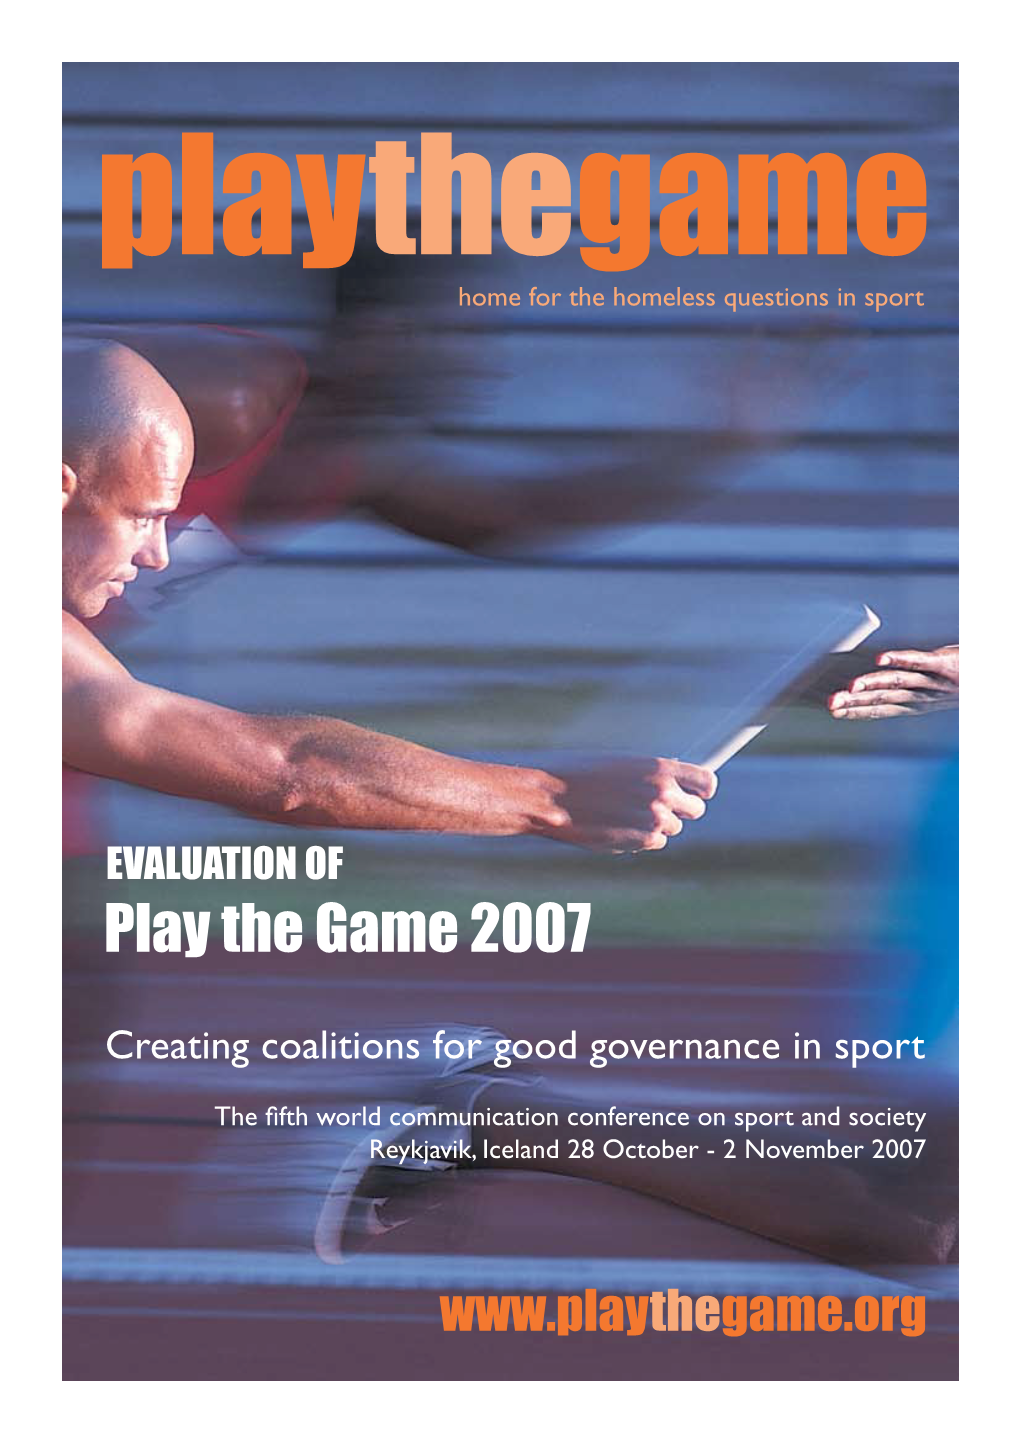 EVALUATION of Play the Game 2007